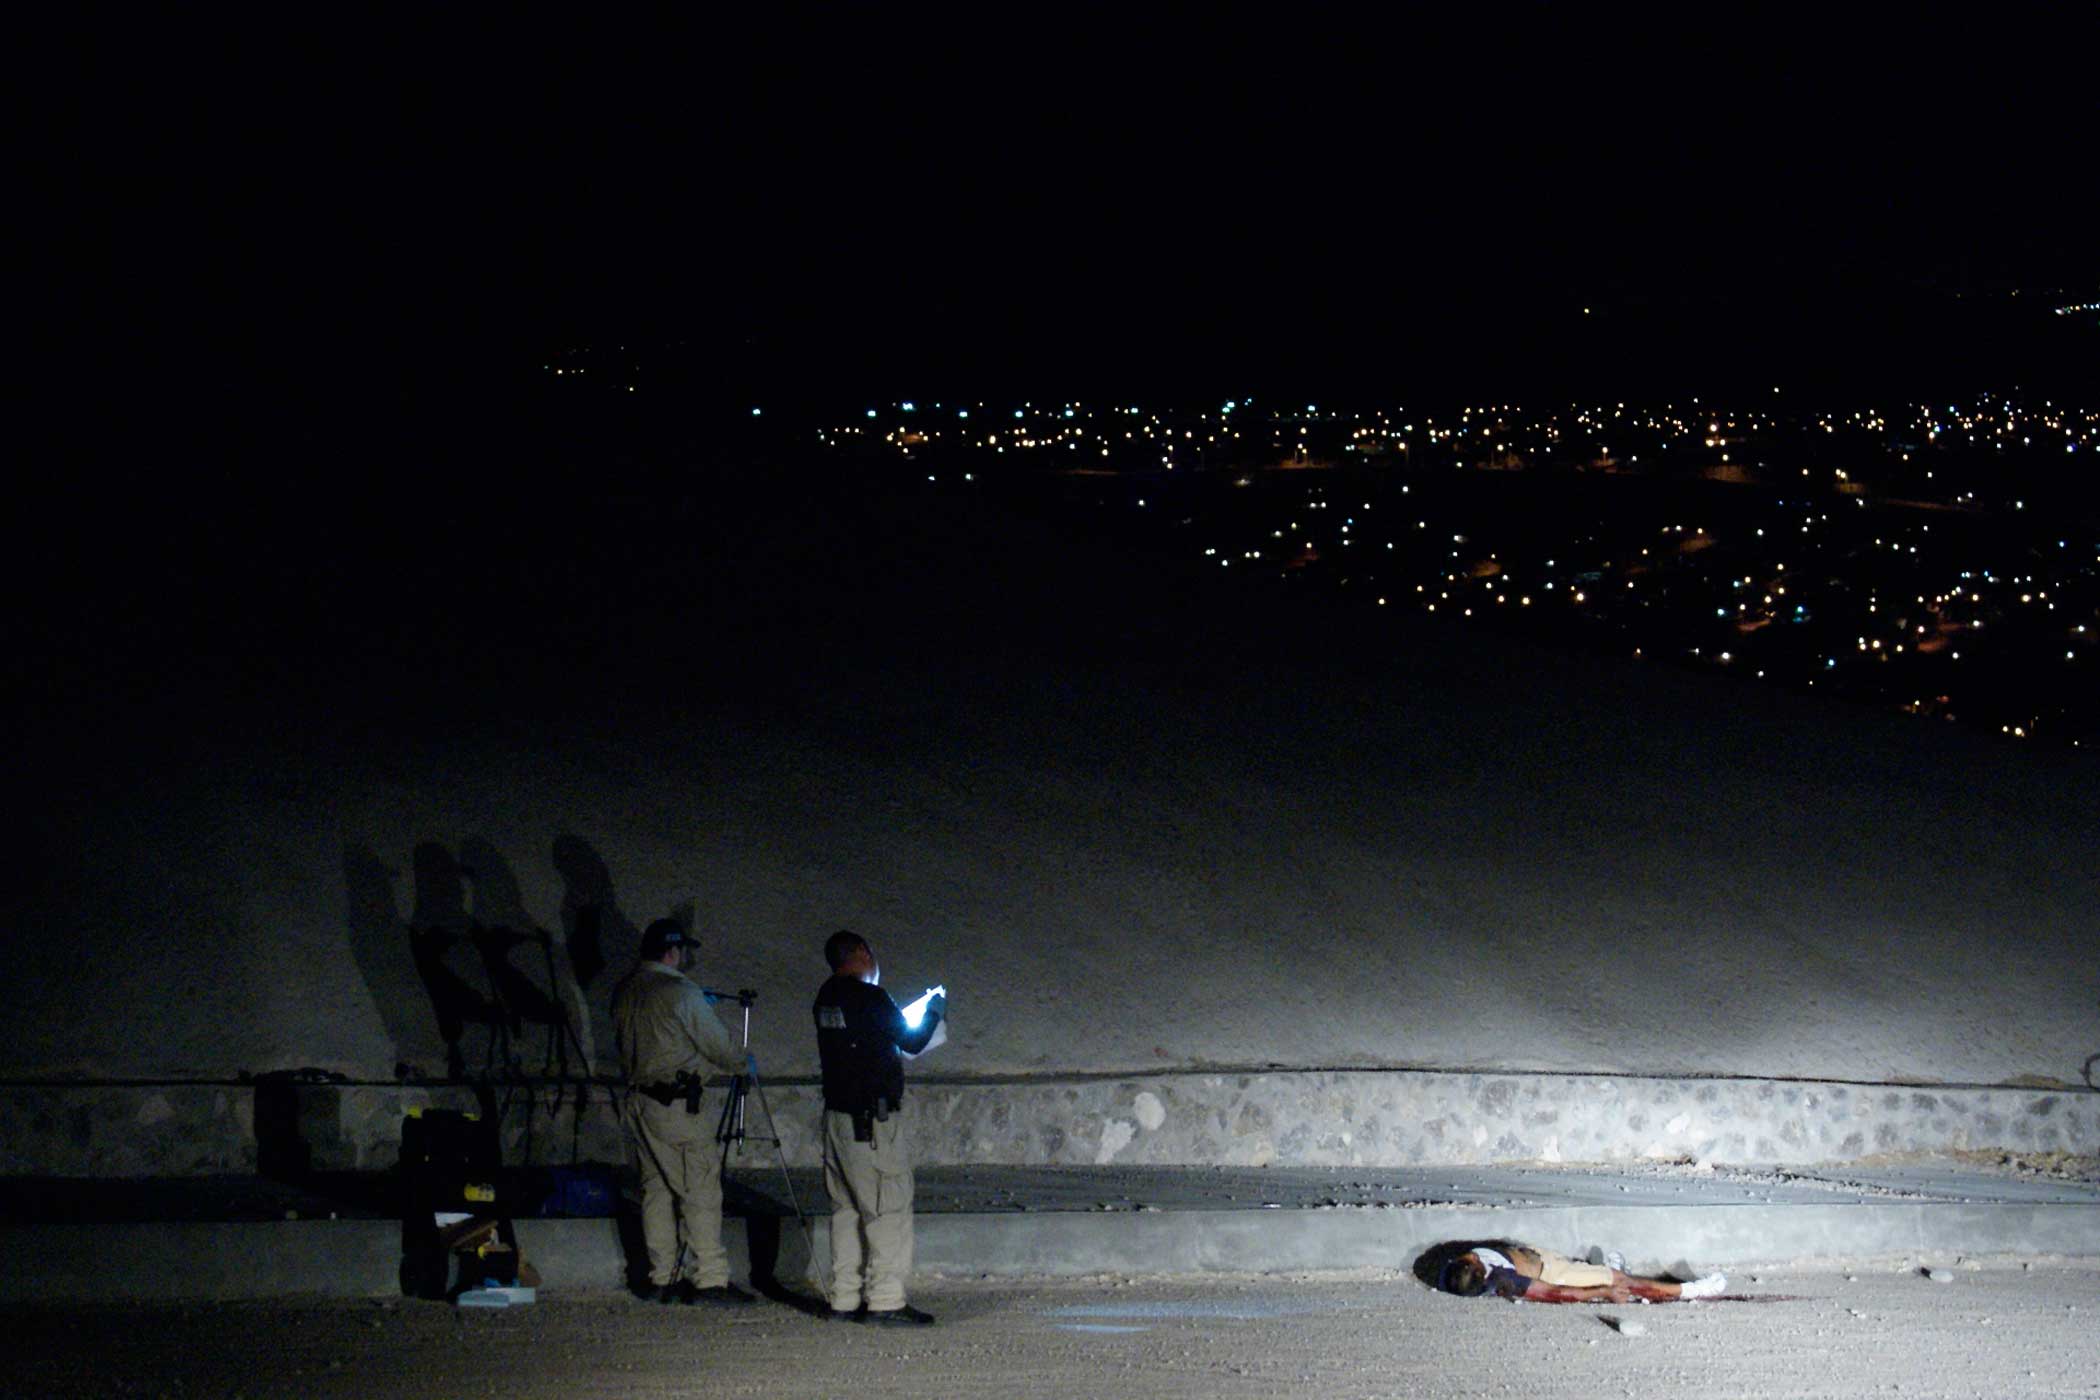 A man executed on the road to Camino Real, on the outskirts of Juárez.